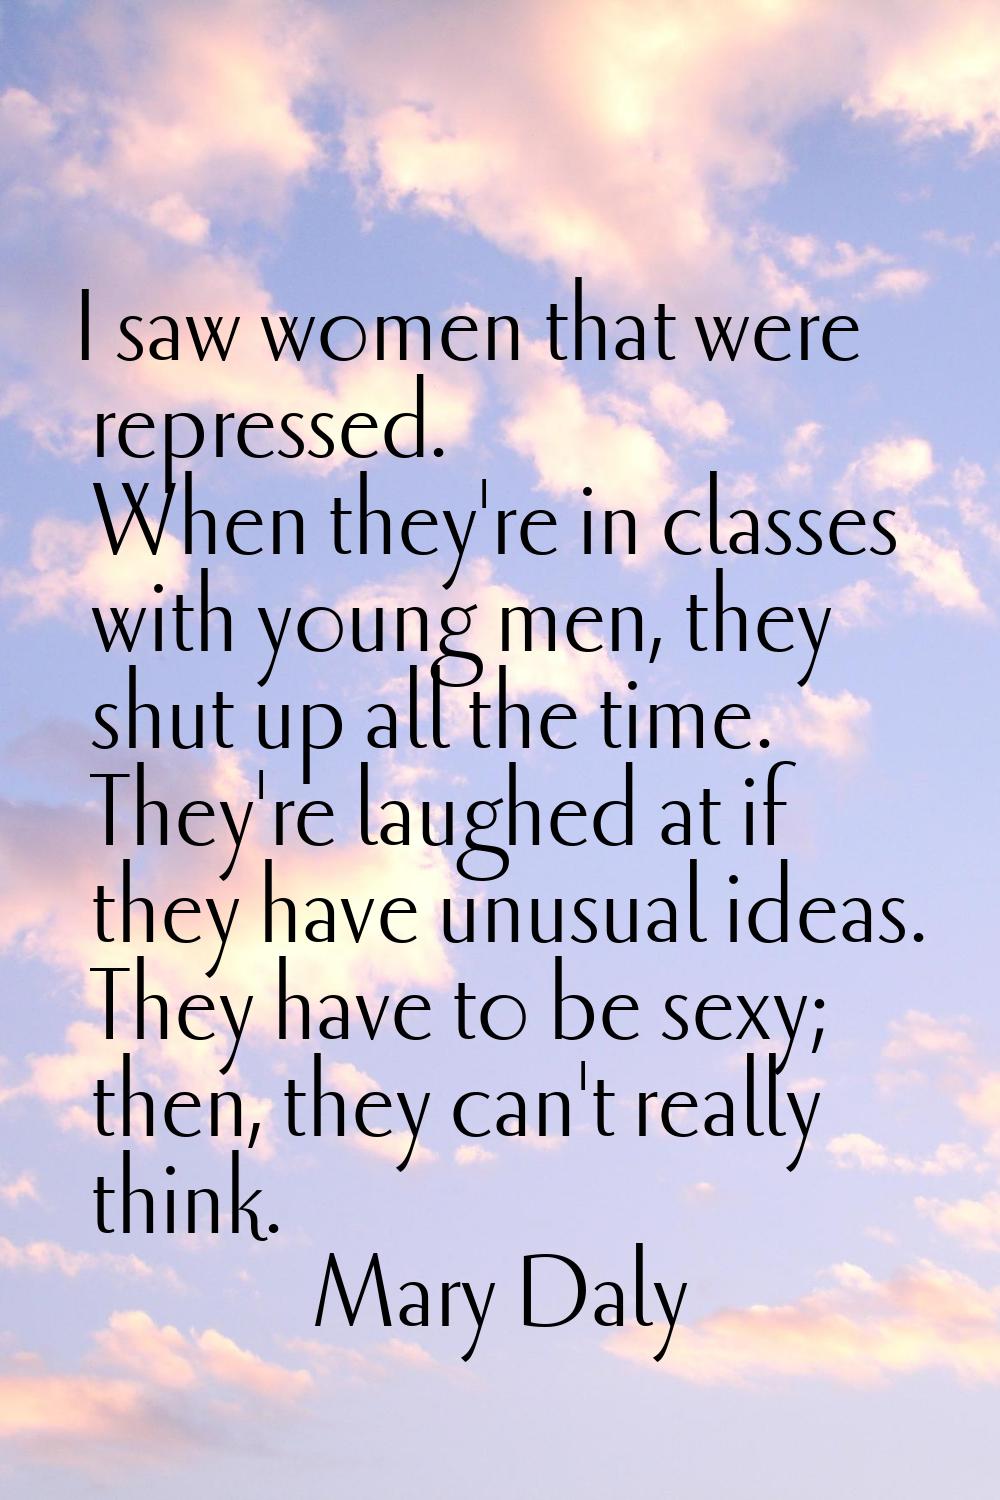 I saw women that were repressed. When they're in classes with young men, they shut up all the time.